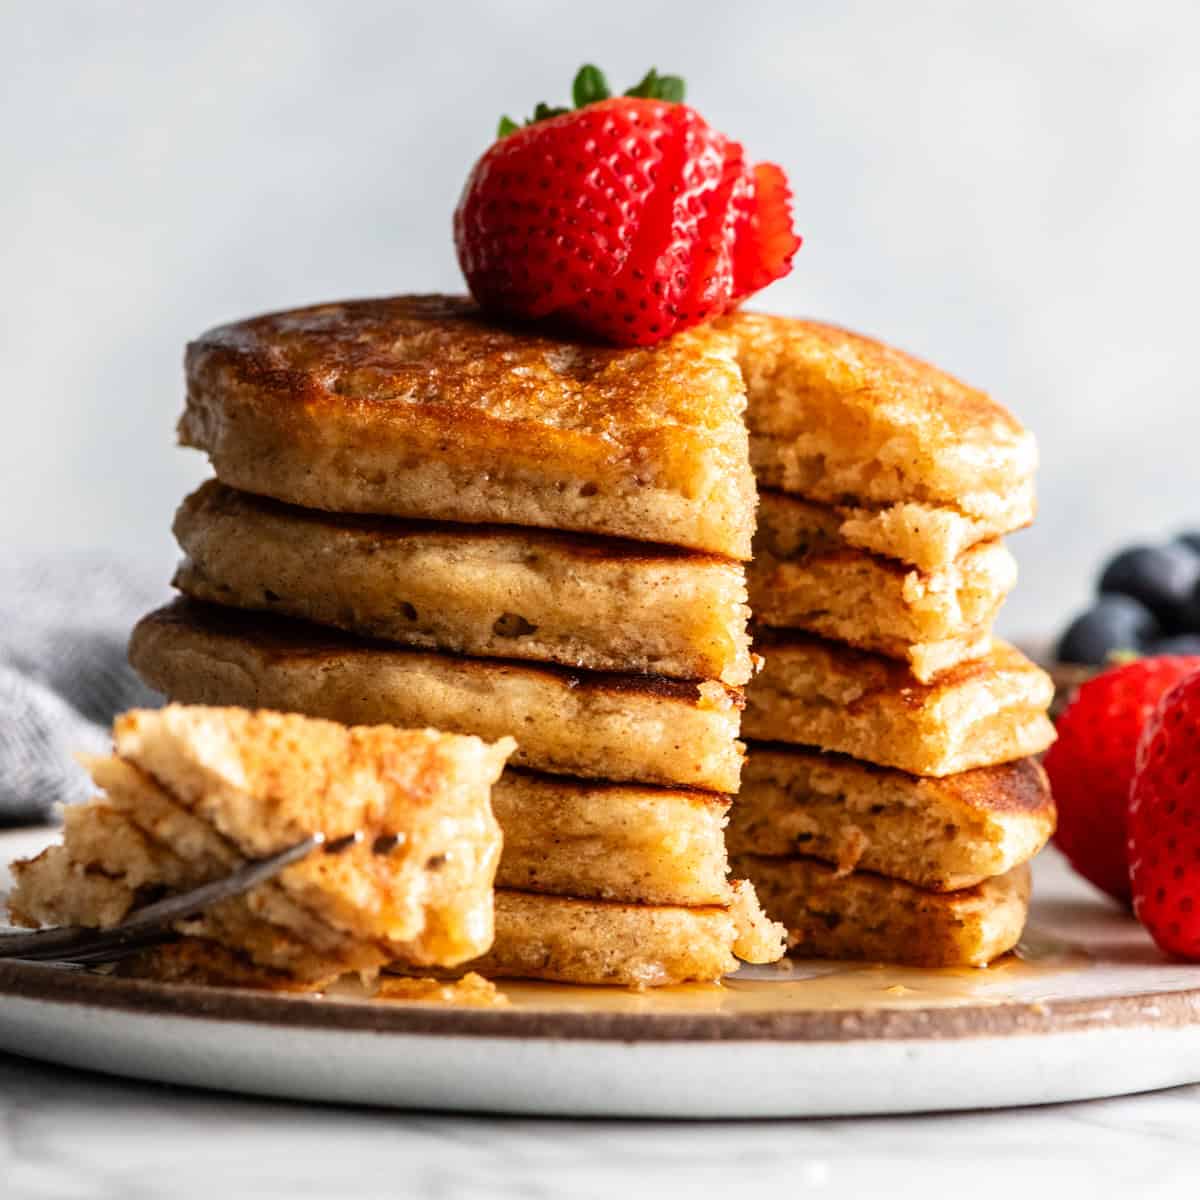 a stack of 5 whole wheat pancakes with a bite cut out of them on a fork next to the stack on a plate